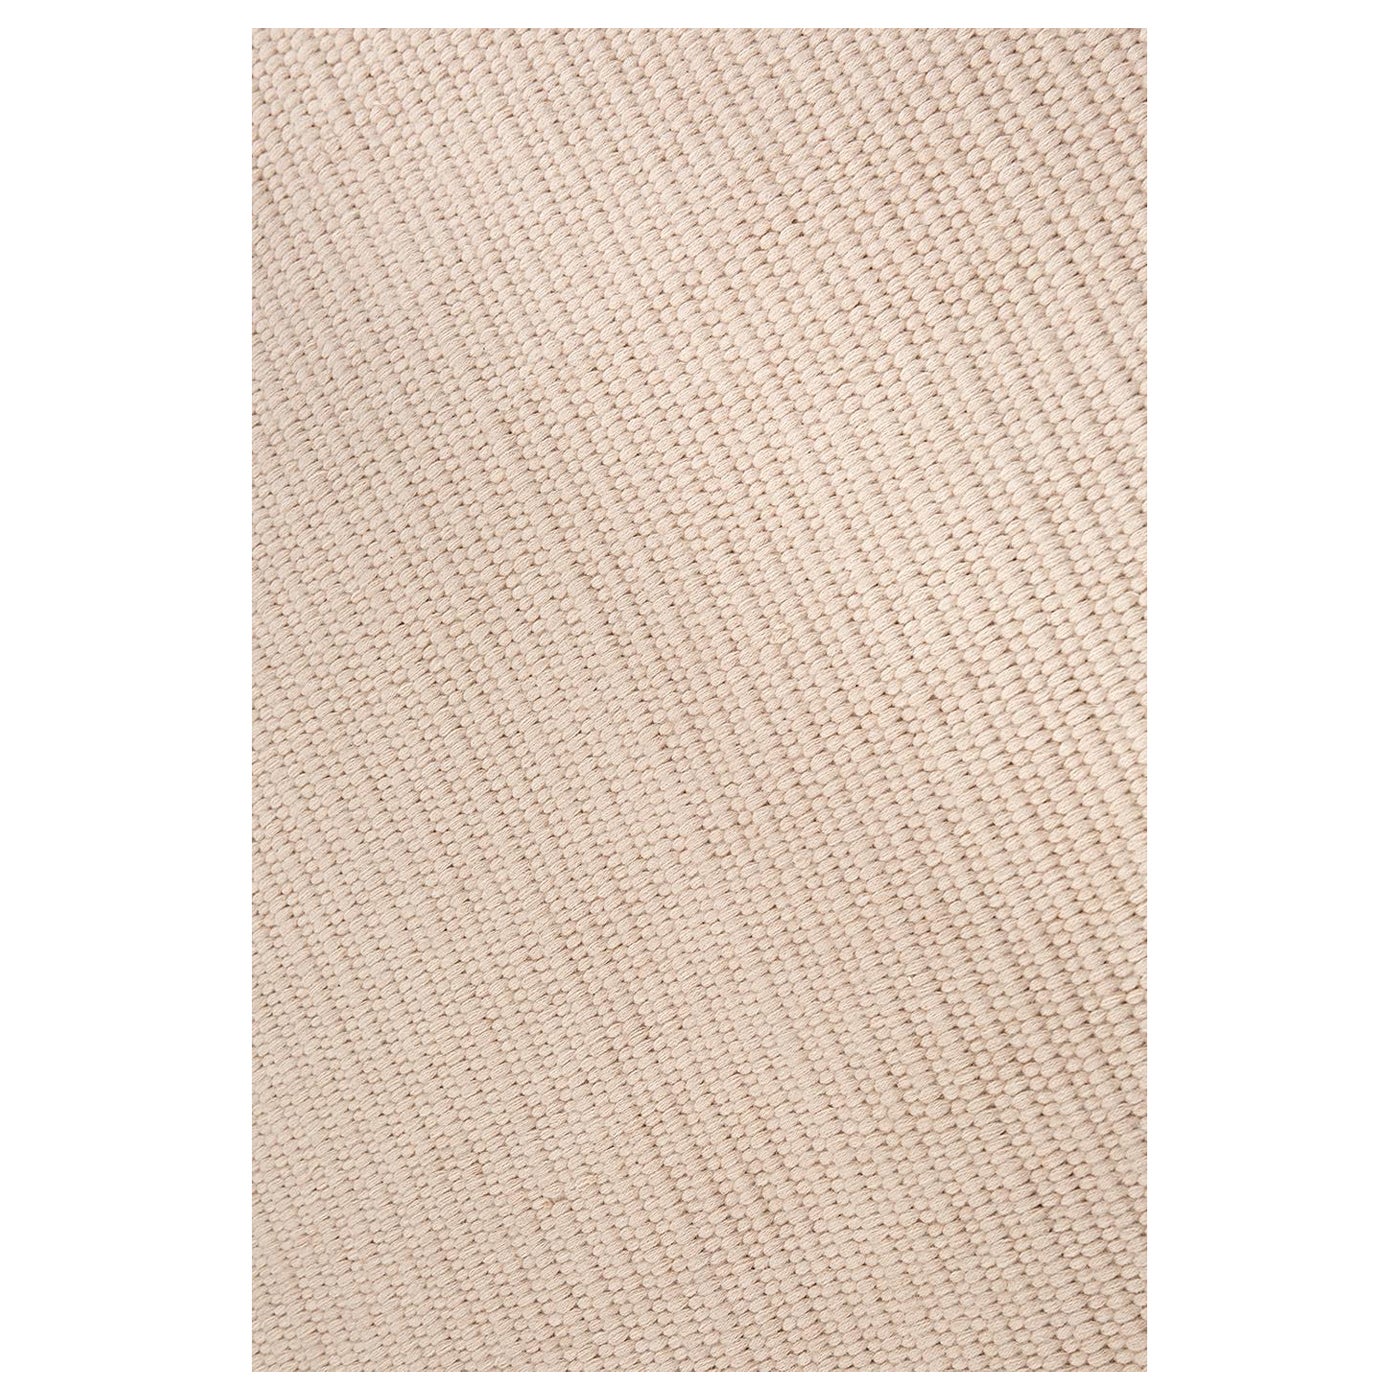 Step Into Luxury - 'Mesh' Rug - 170 x 240 cm - Hand-Woven in Sustainable Alpaca